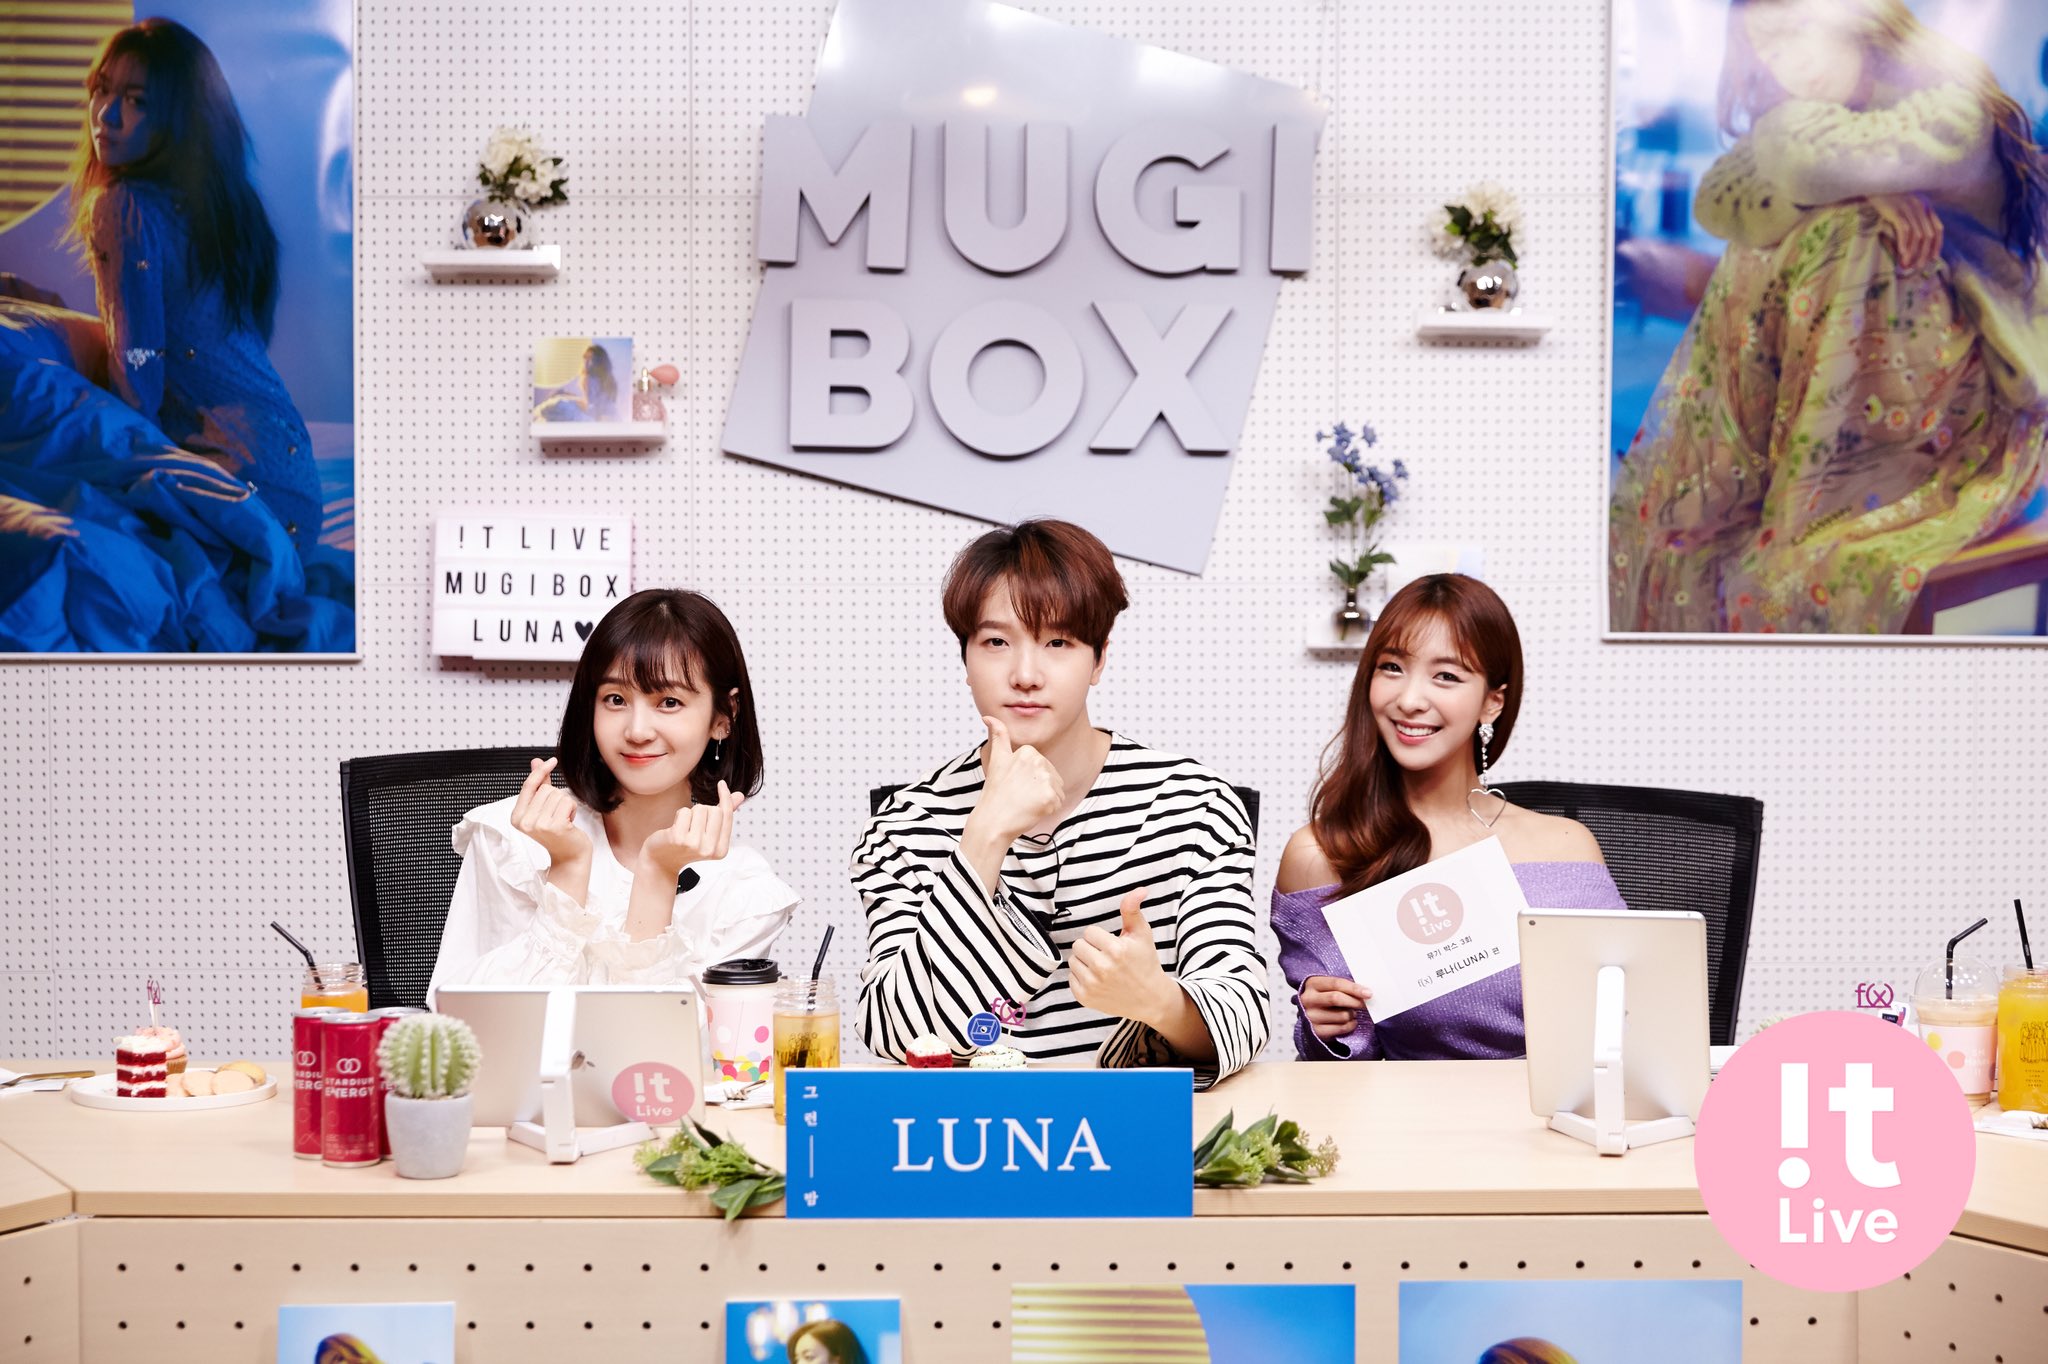 180424 !t Live Special  The 2nd MUGI-BOX LUNA 선영이 by SMmakesitLive (1).jpg